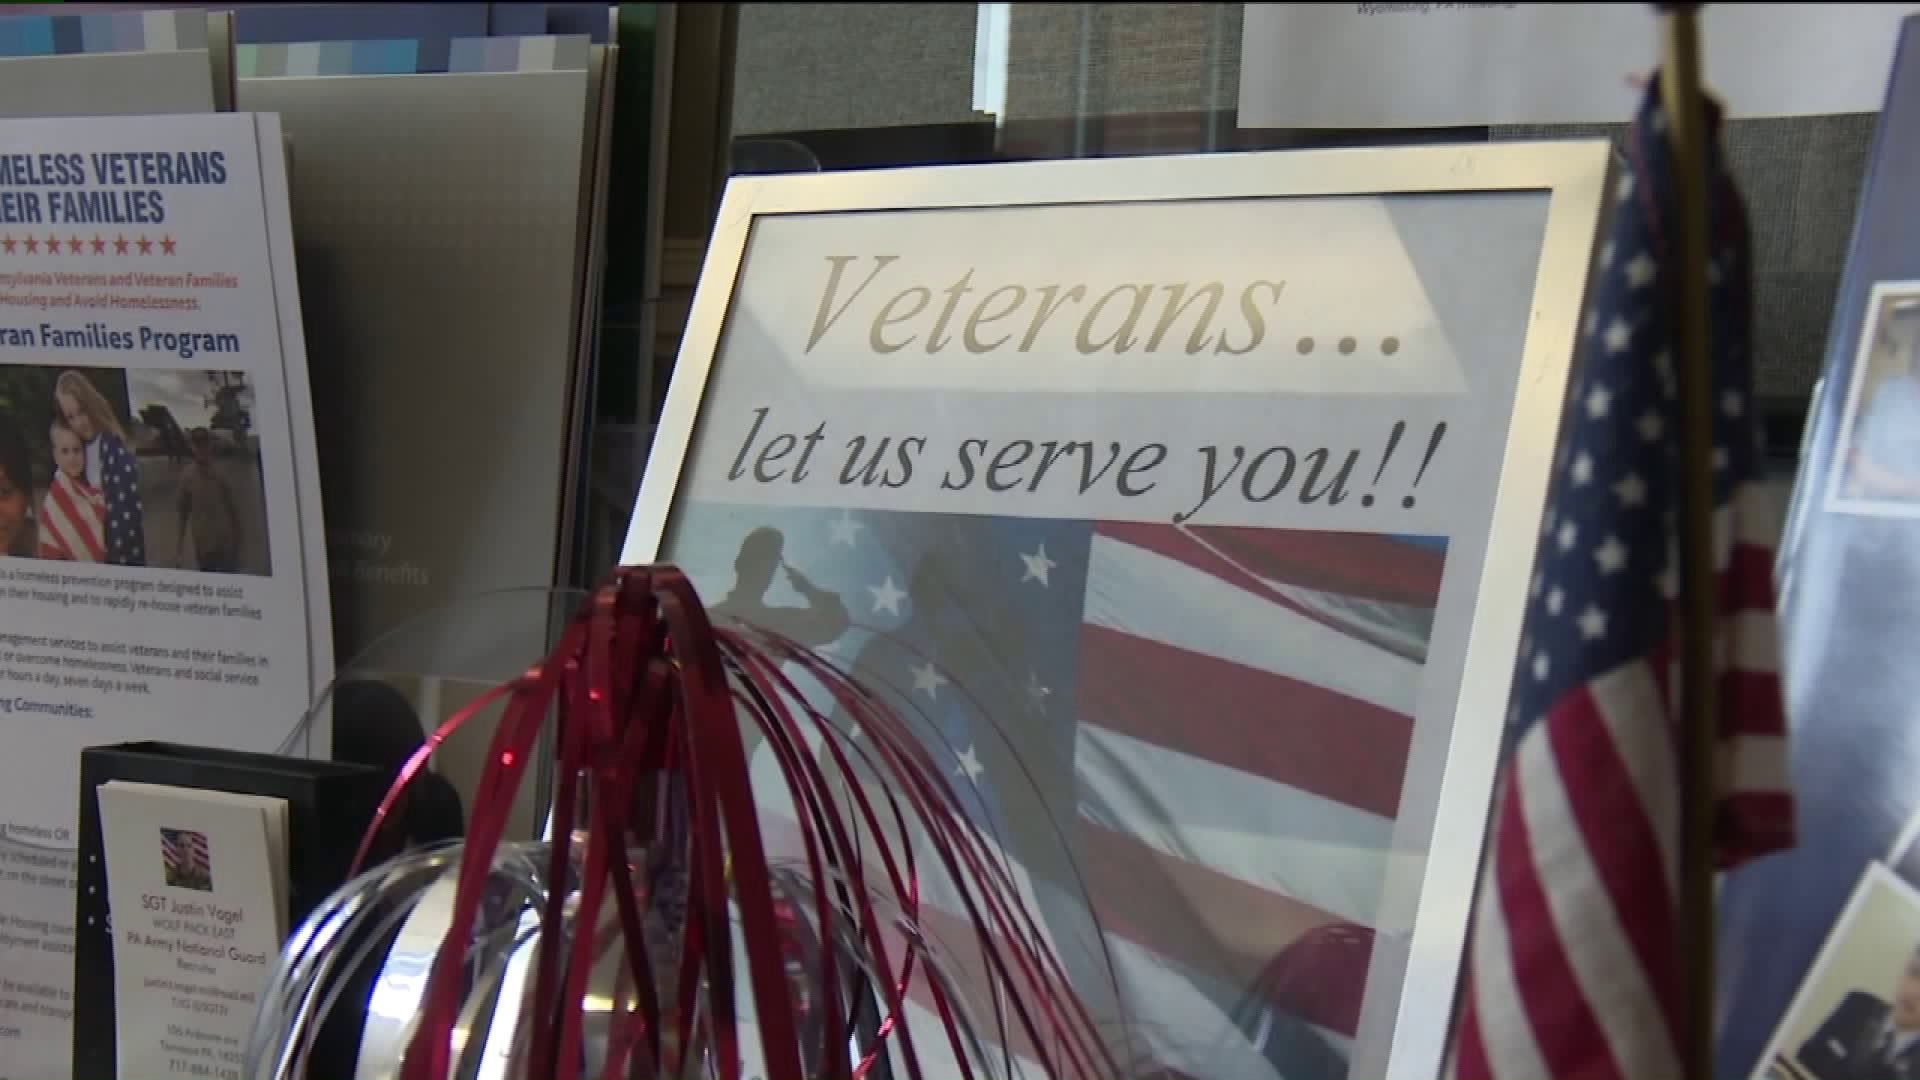 Network of Care Aims to Help Veterans Across Pennsylvania